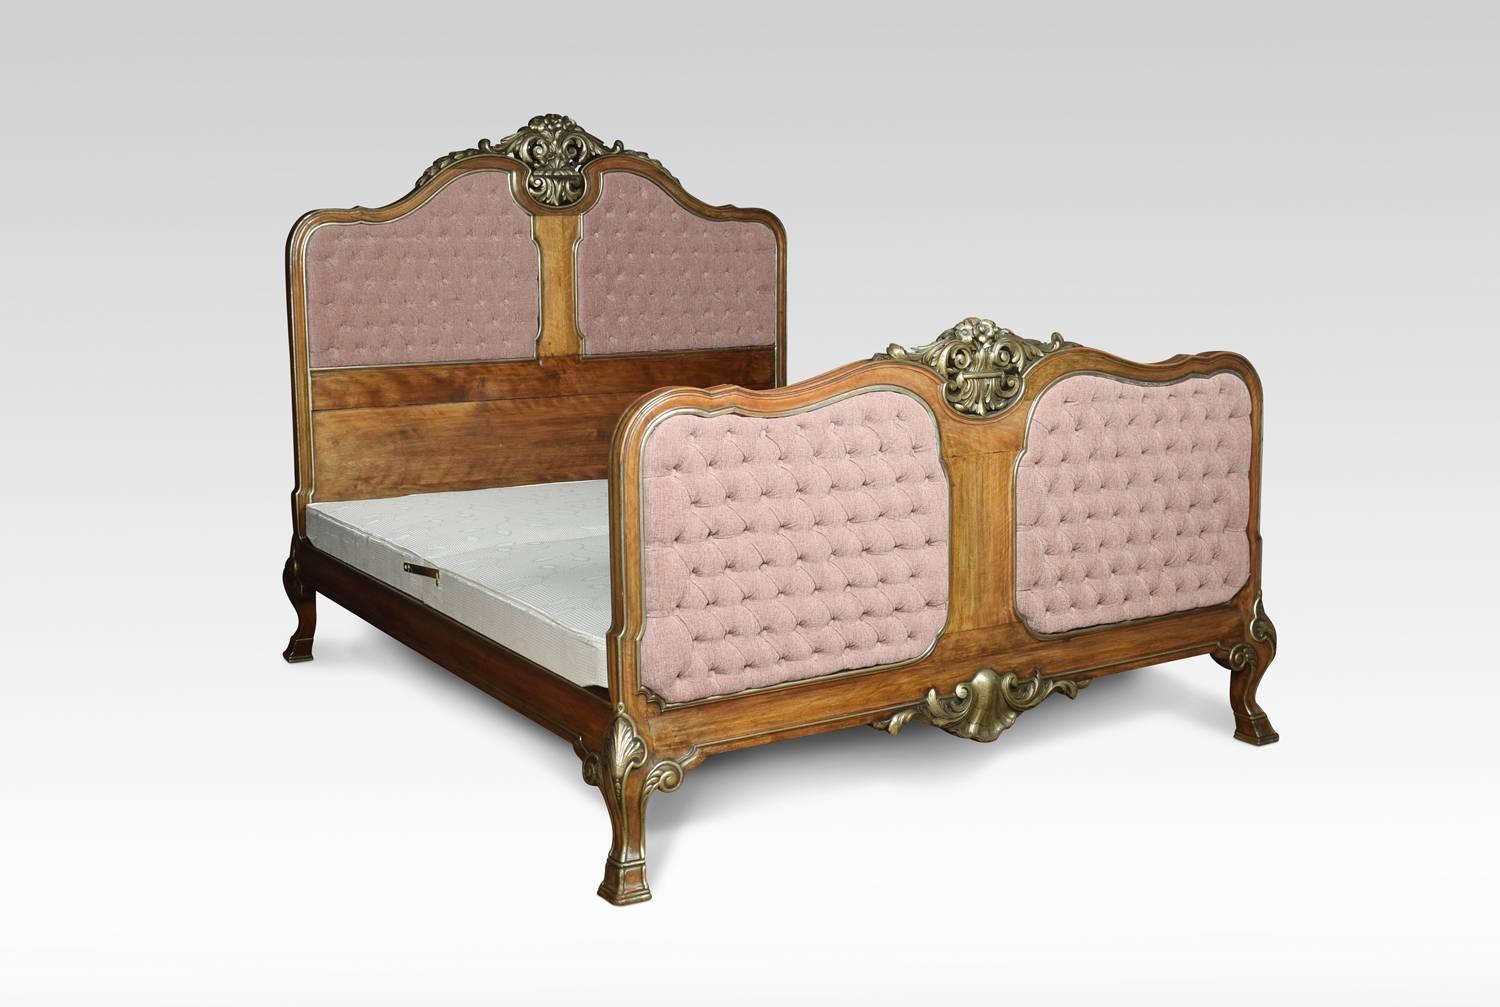 Walnut and parcel-gilt king size bed with scrolling carved floral motifs, surrounding inset deep buttoned upholstered panels. All raised up on leaf volute capped legs.
This bed will fit a standard king size mattress.
Dimensions:
Height 62.5